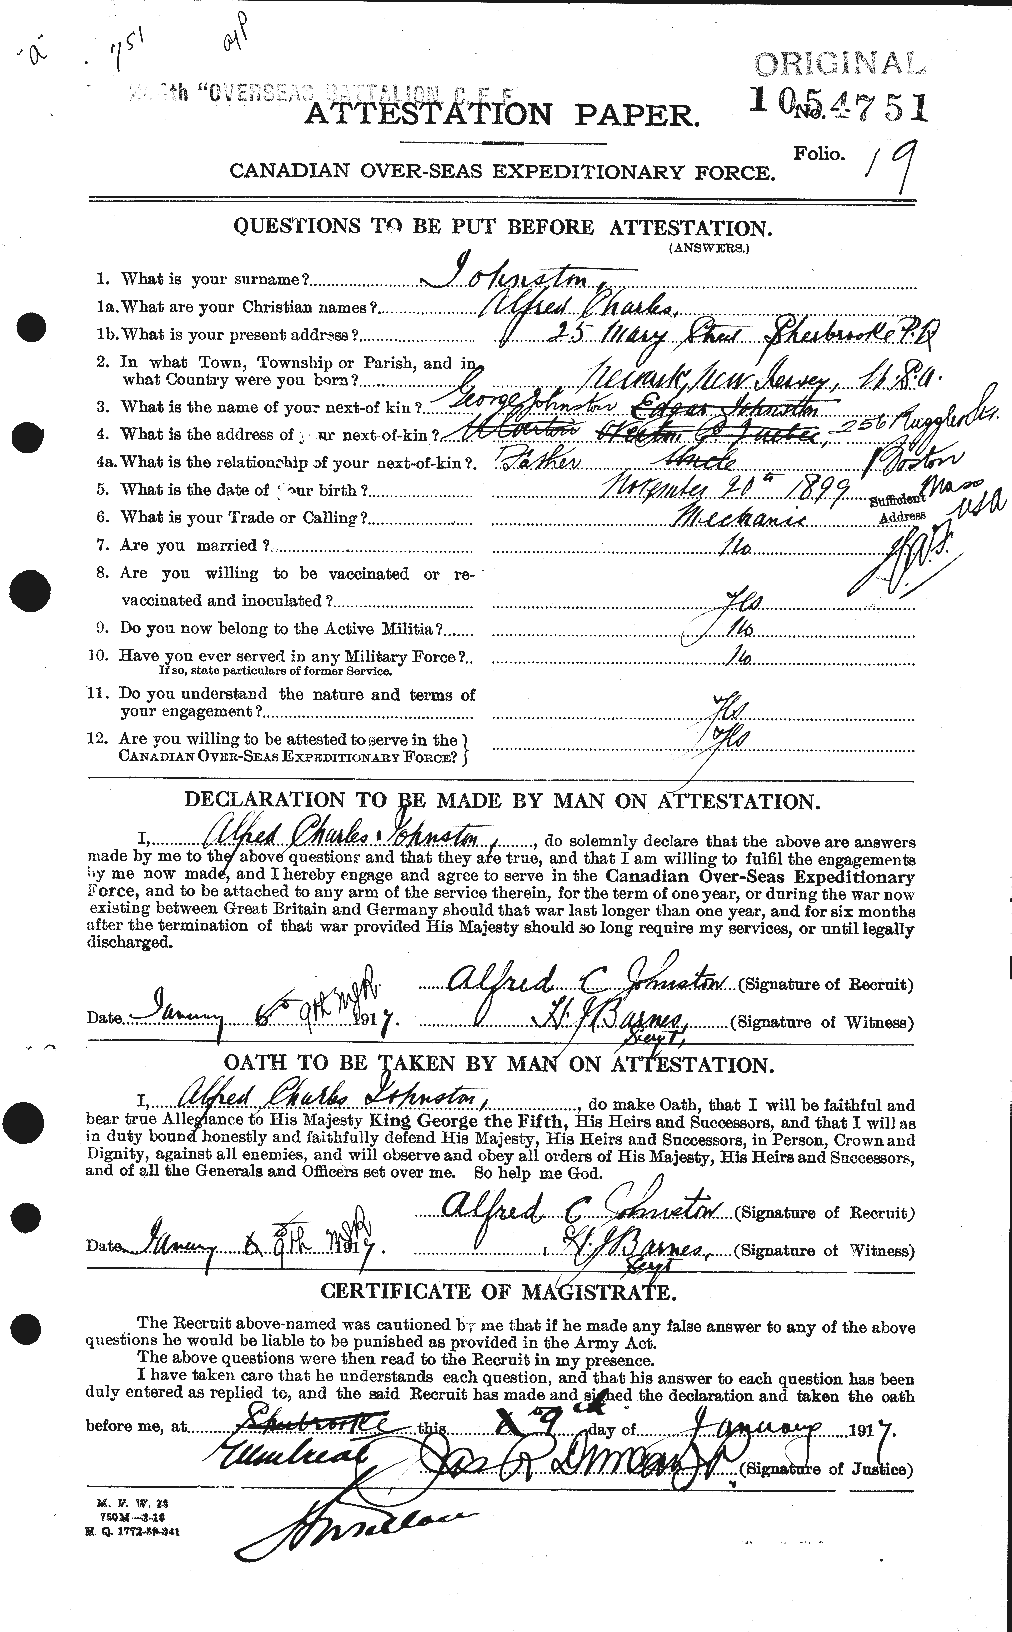 Personnel Records of the First World War - CEF 420988a